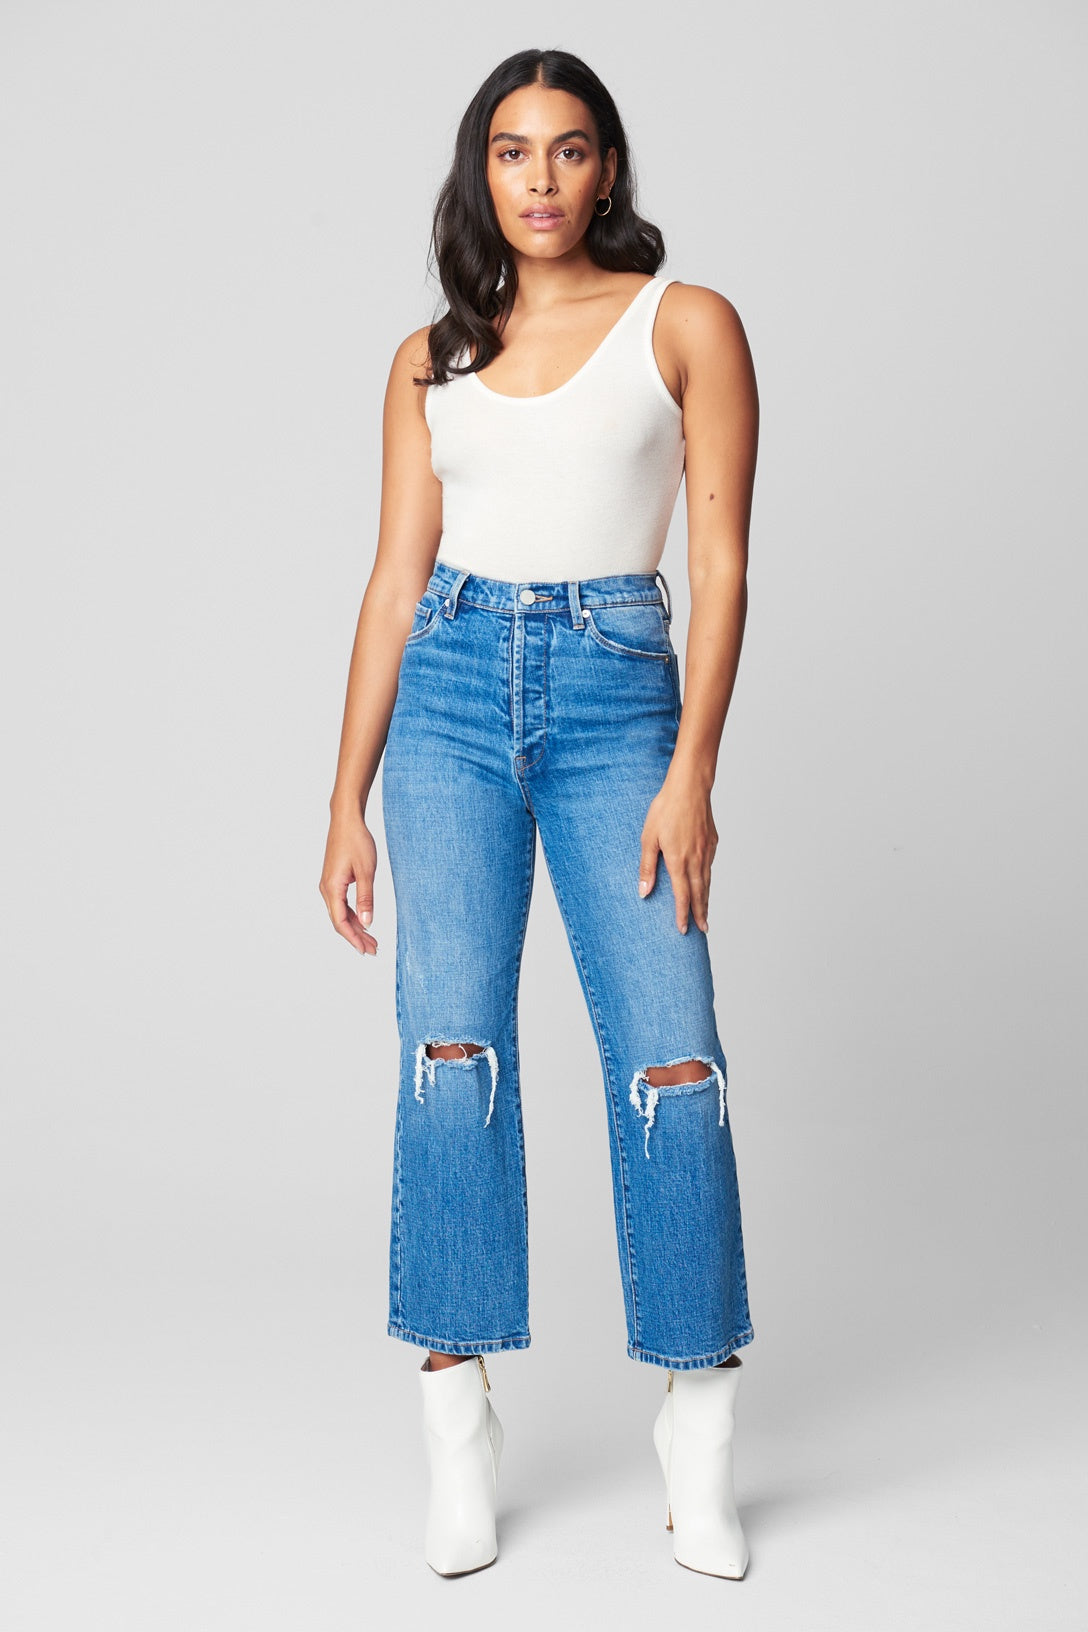 The Baxter Rib Cage Jean in Whirlwind